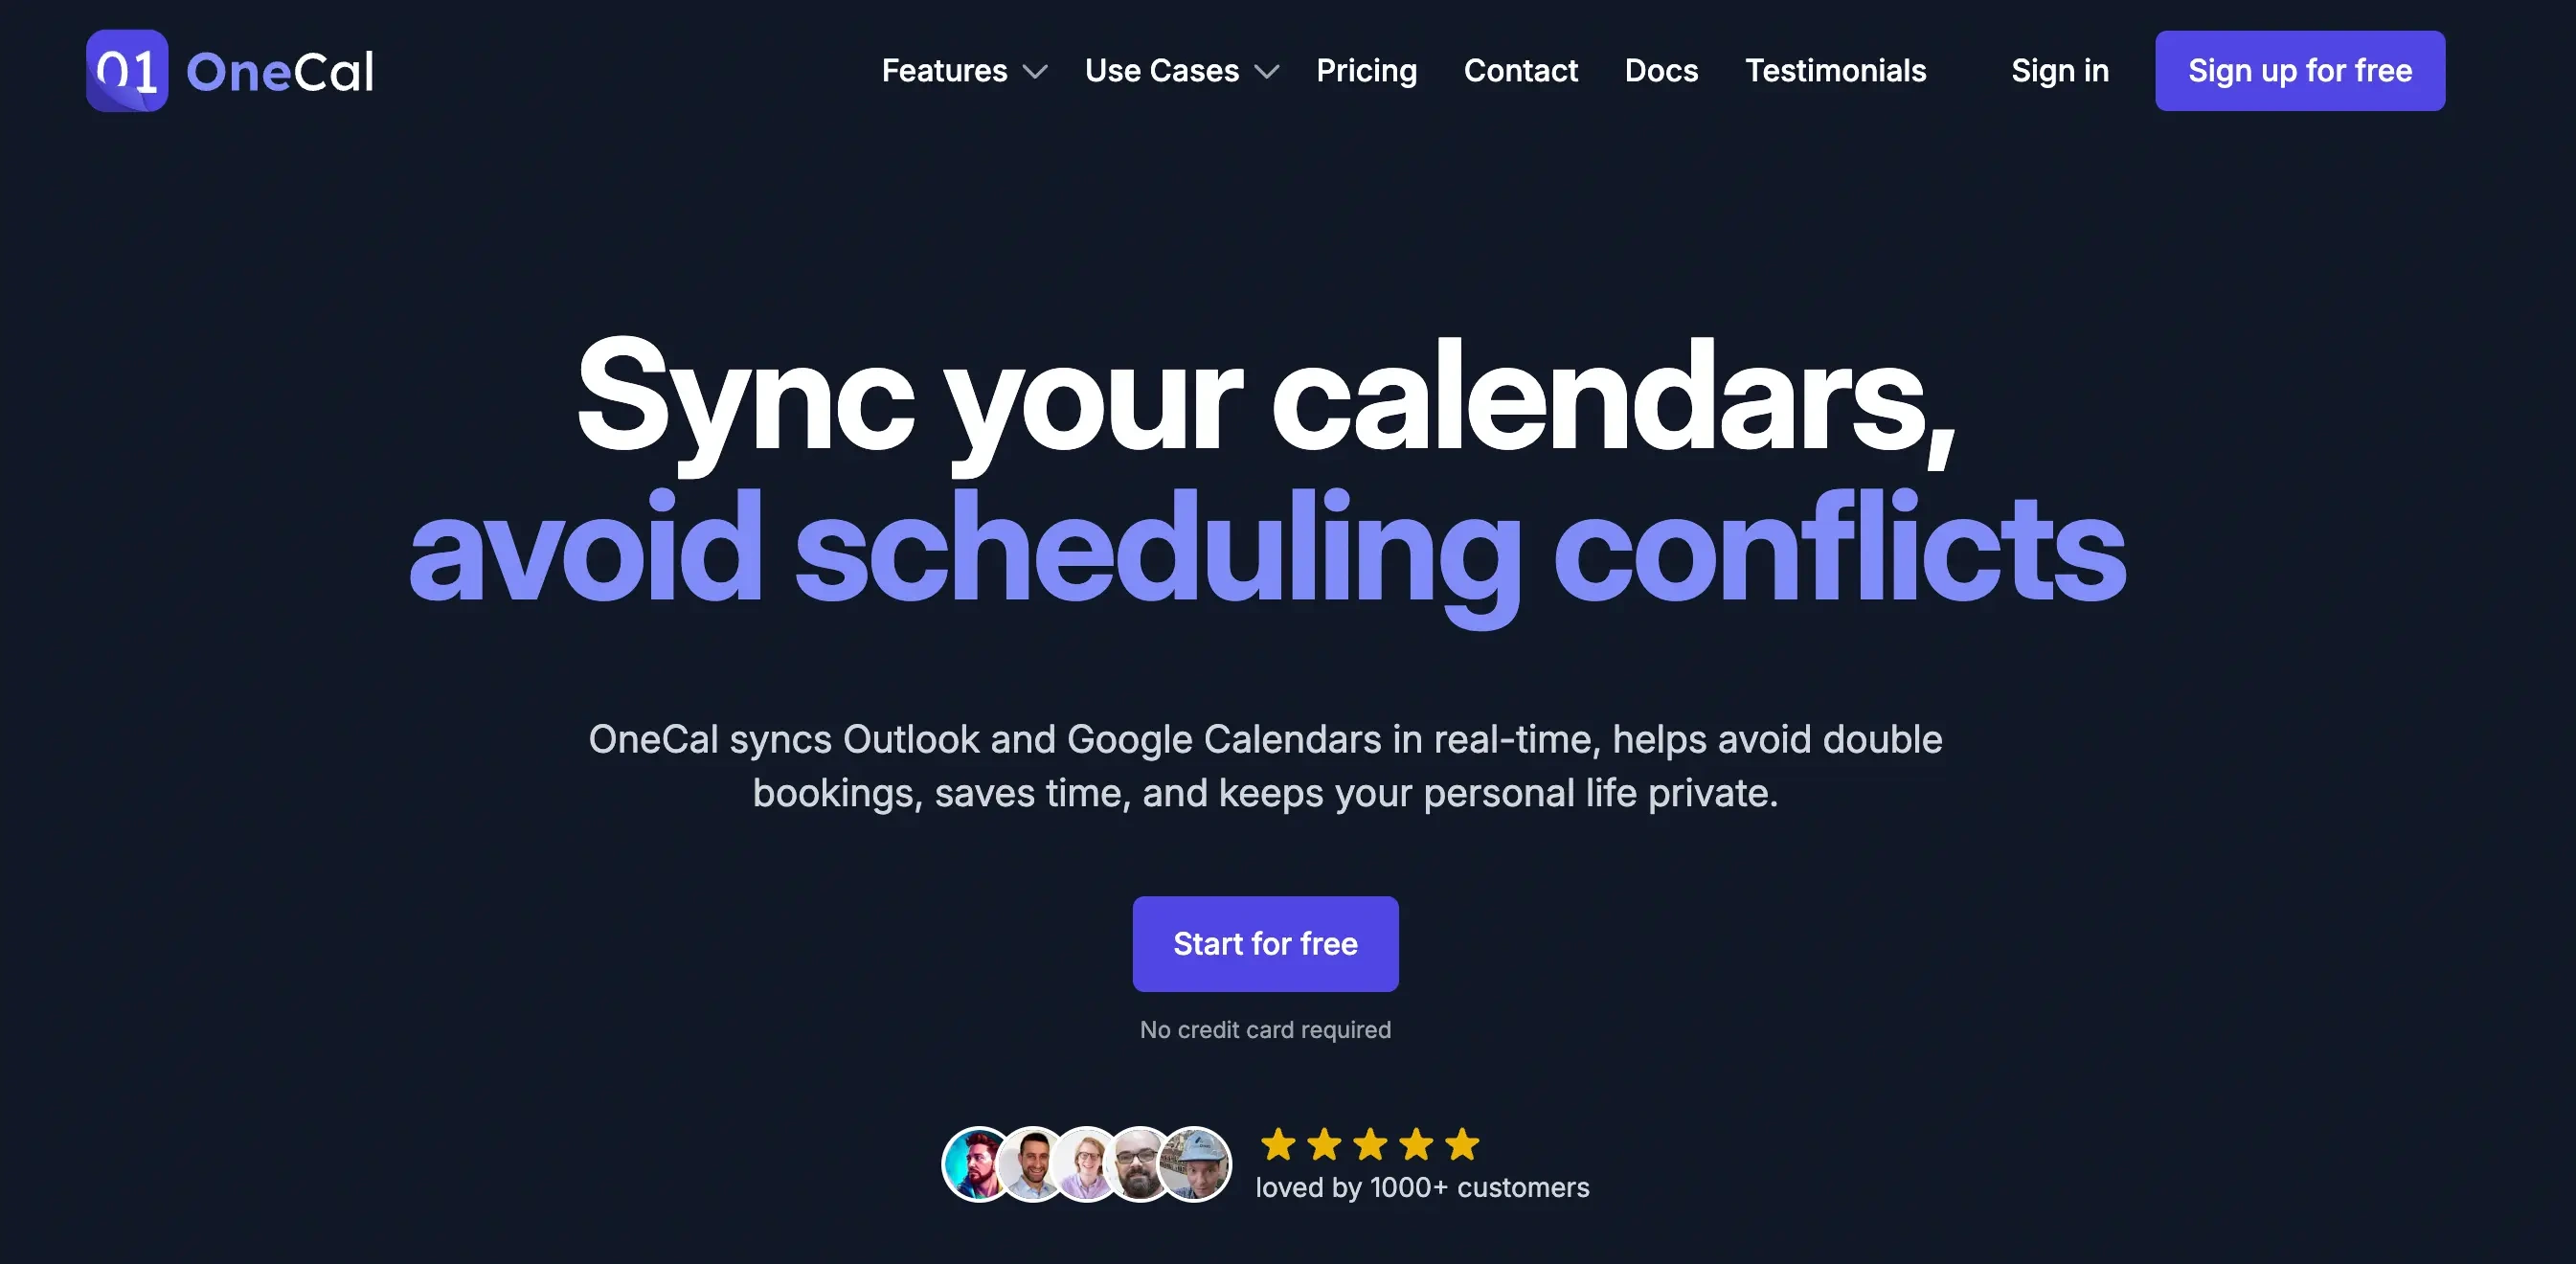 Sync your calendars with OneCal